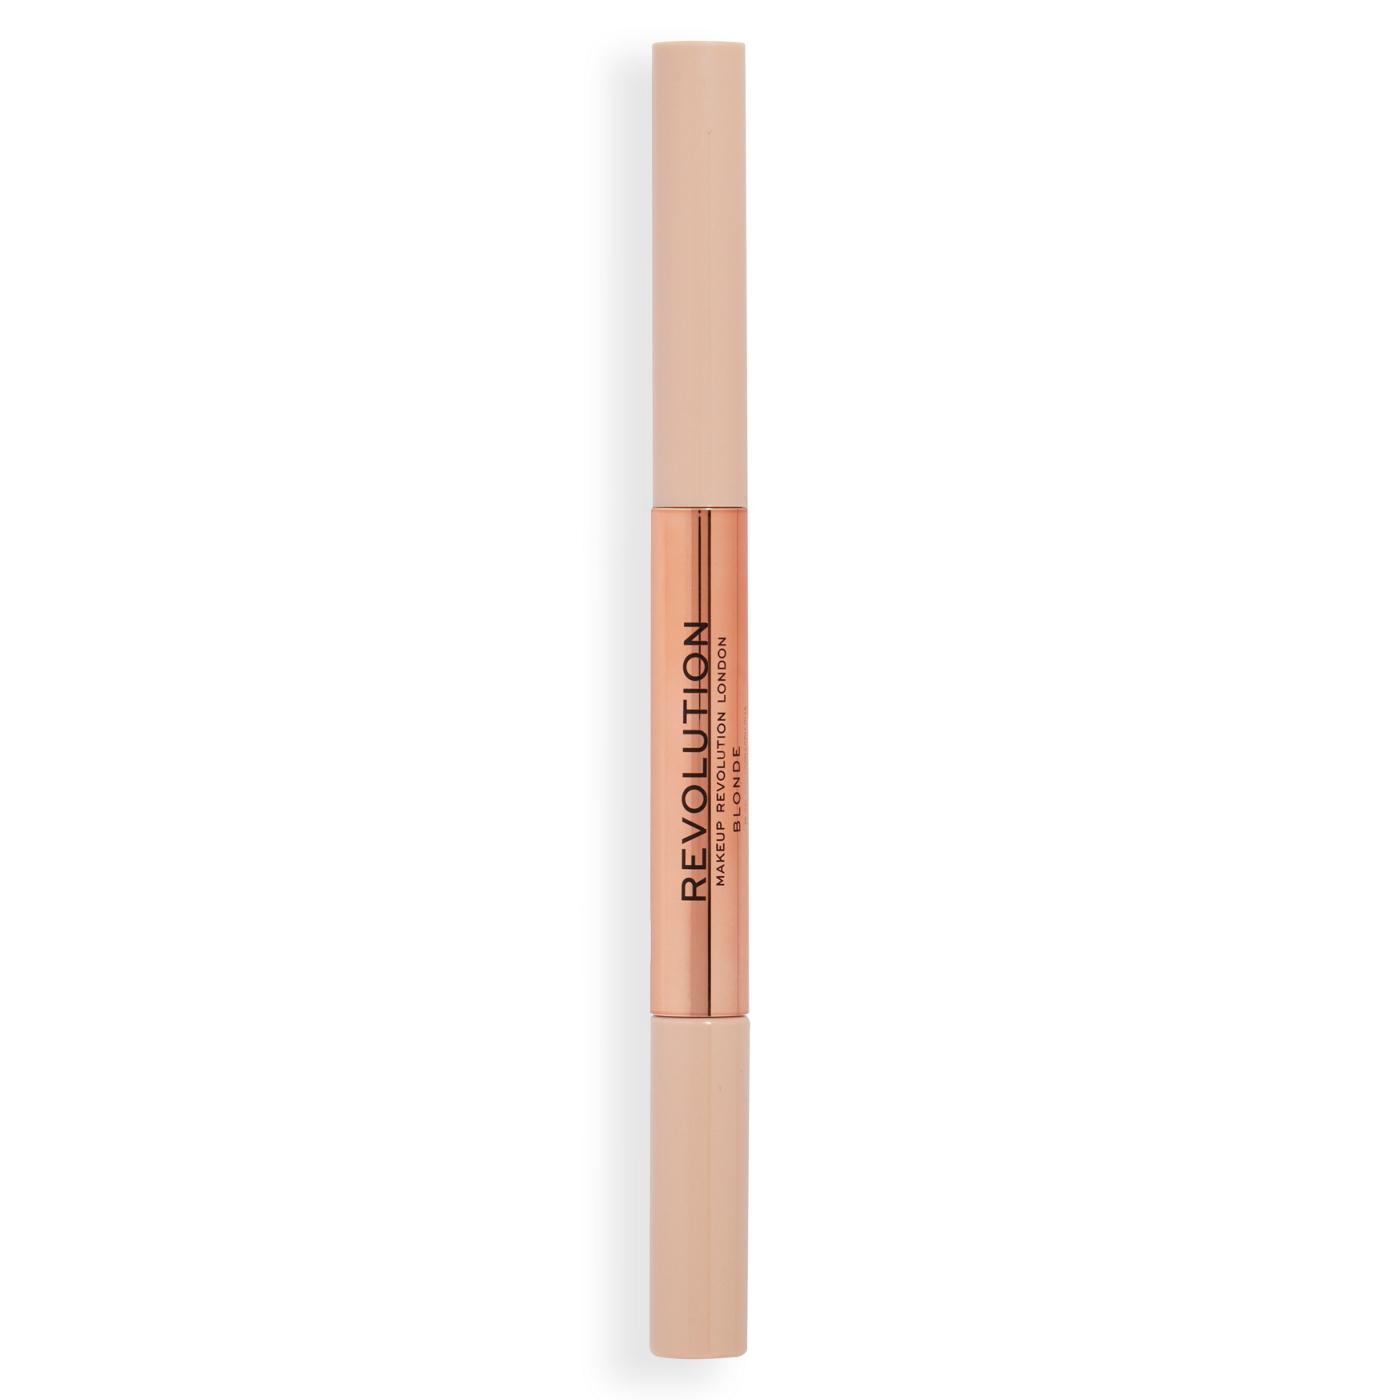 Makeup Revolution Fluffy Brow Duo Pencil - Blonde; image 3 of 4